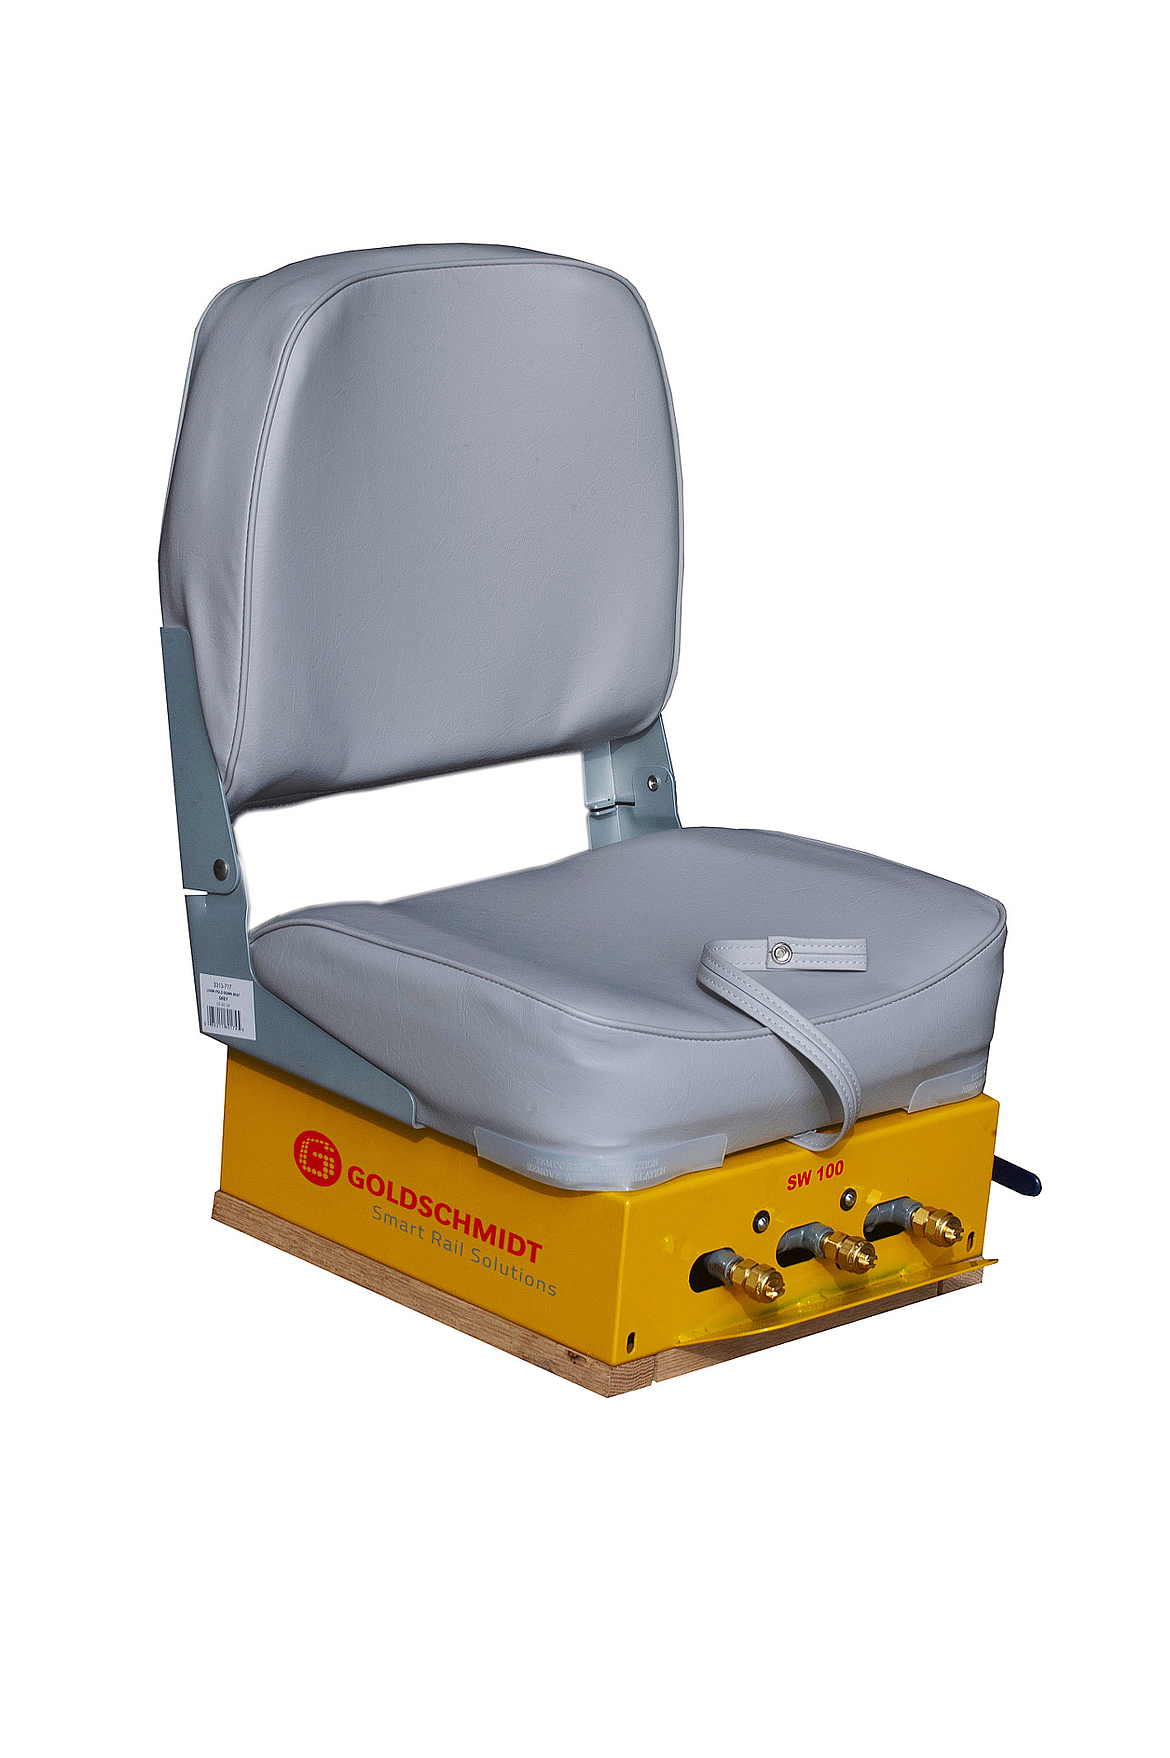 Comfortable working position thanks to the SW 100 welding seat by Goldschmidt